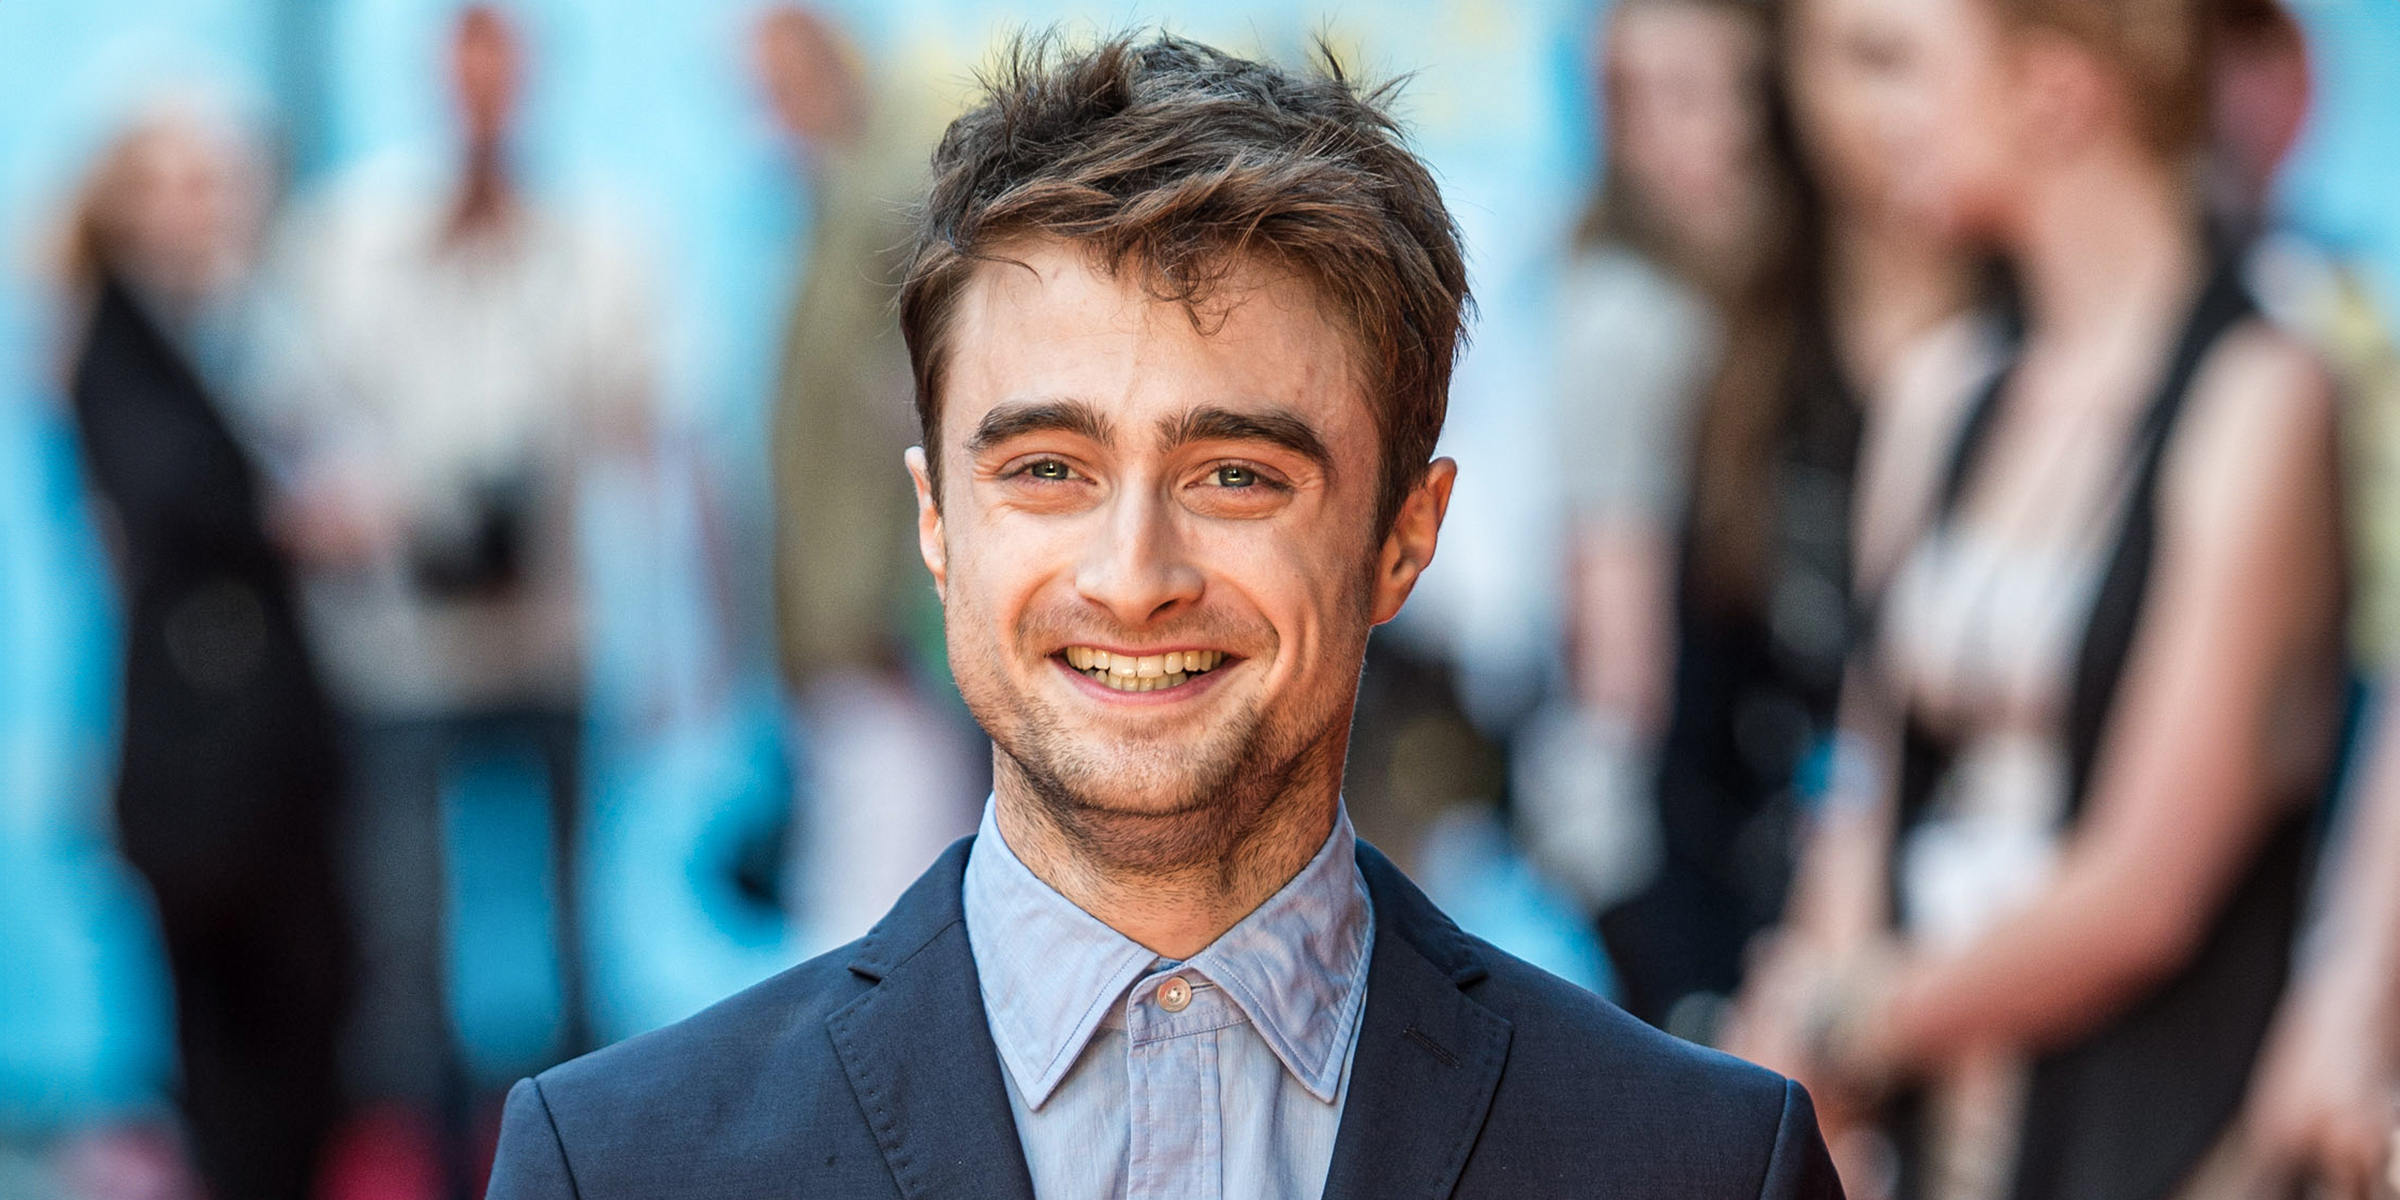 Daniel Radcliffe | Source: Getty Images